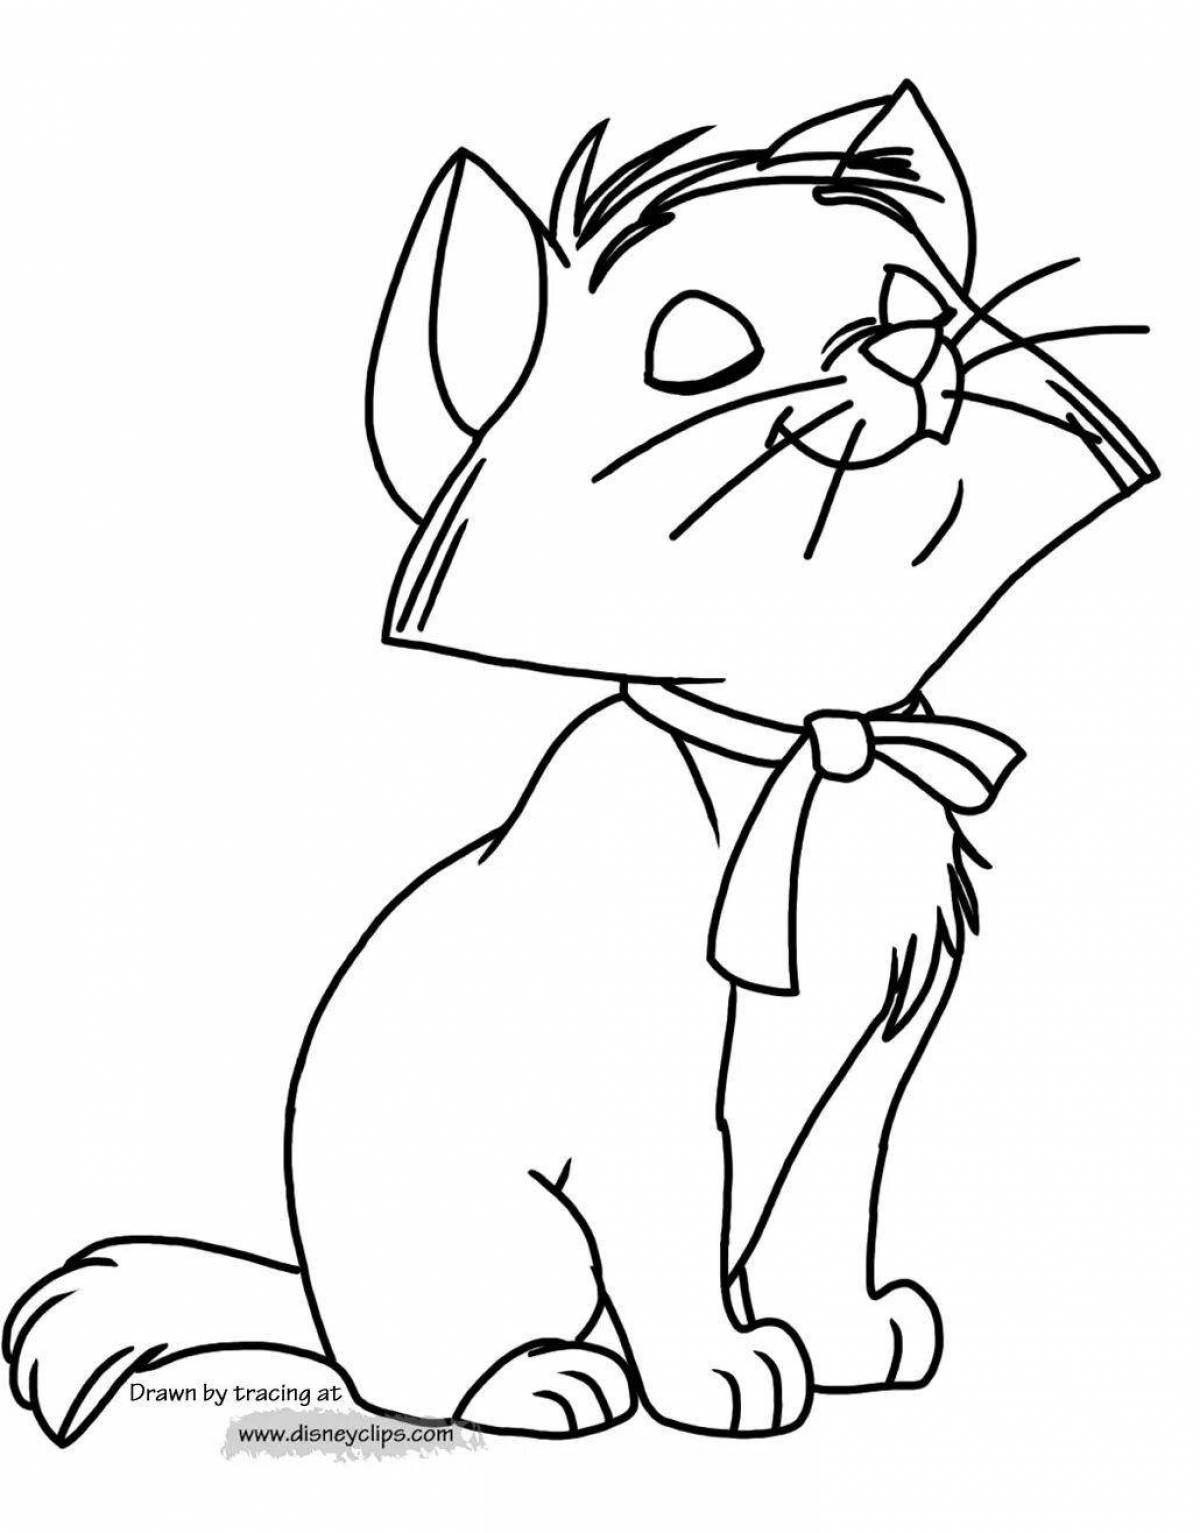 Naughty cat coloring pages